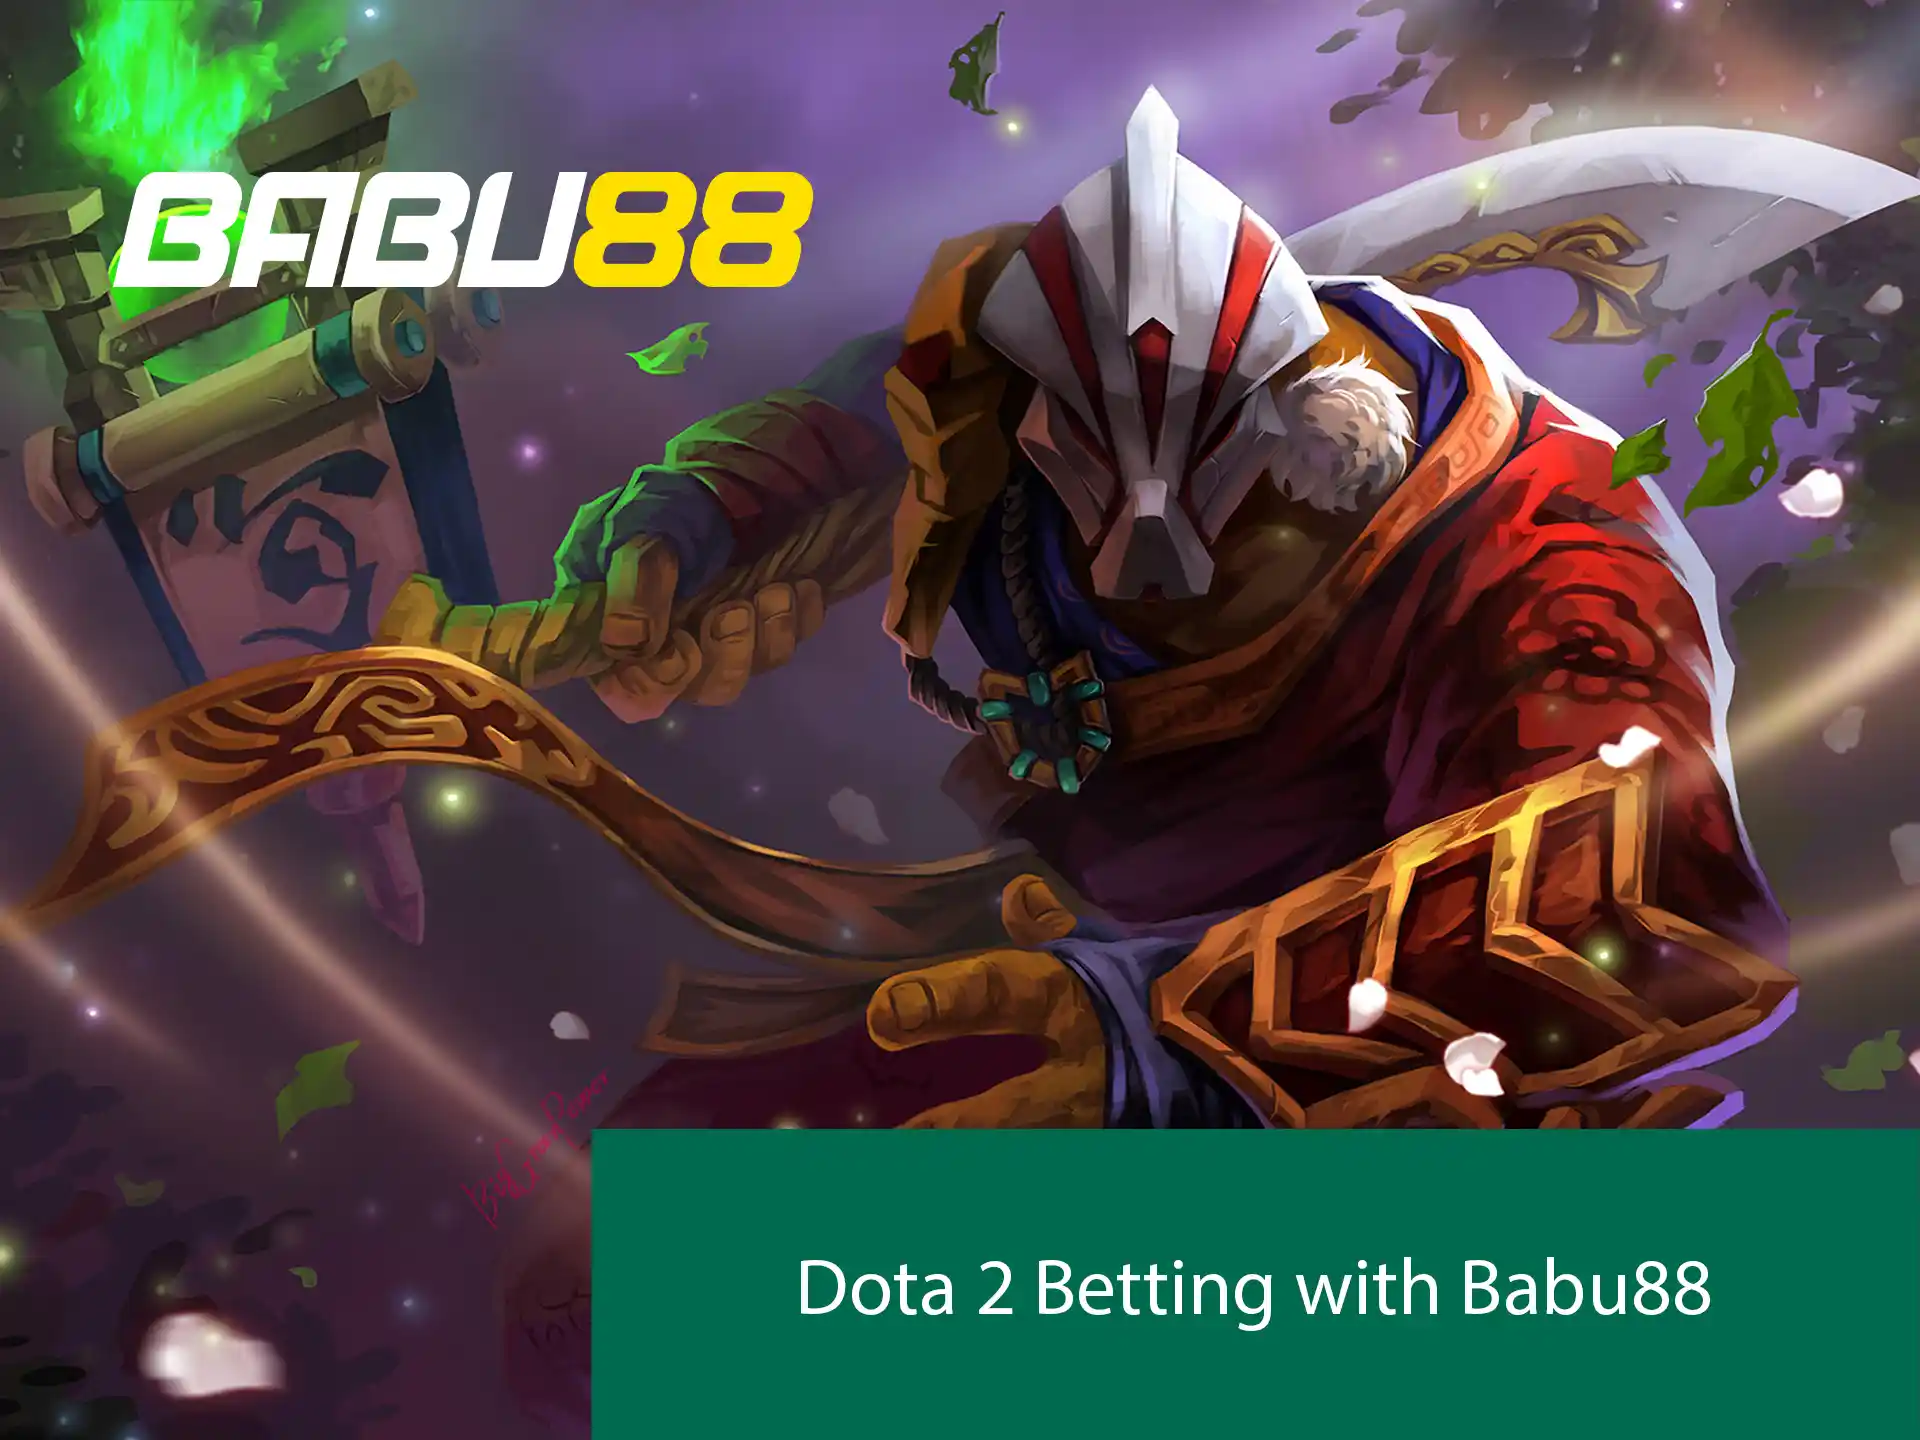 Place bets on Dota 2 from Bangladesh and get rewards.